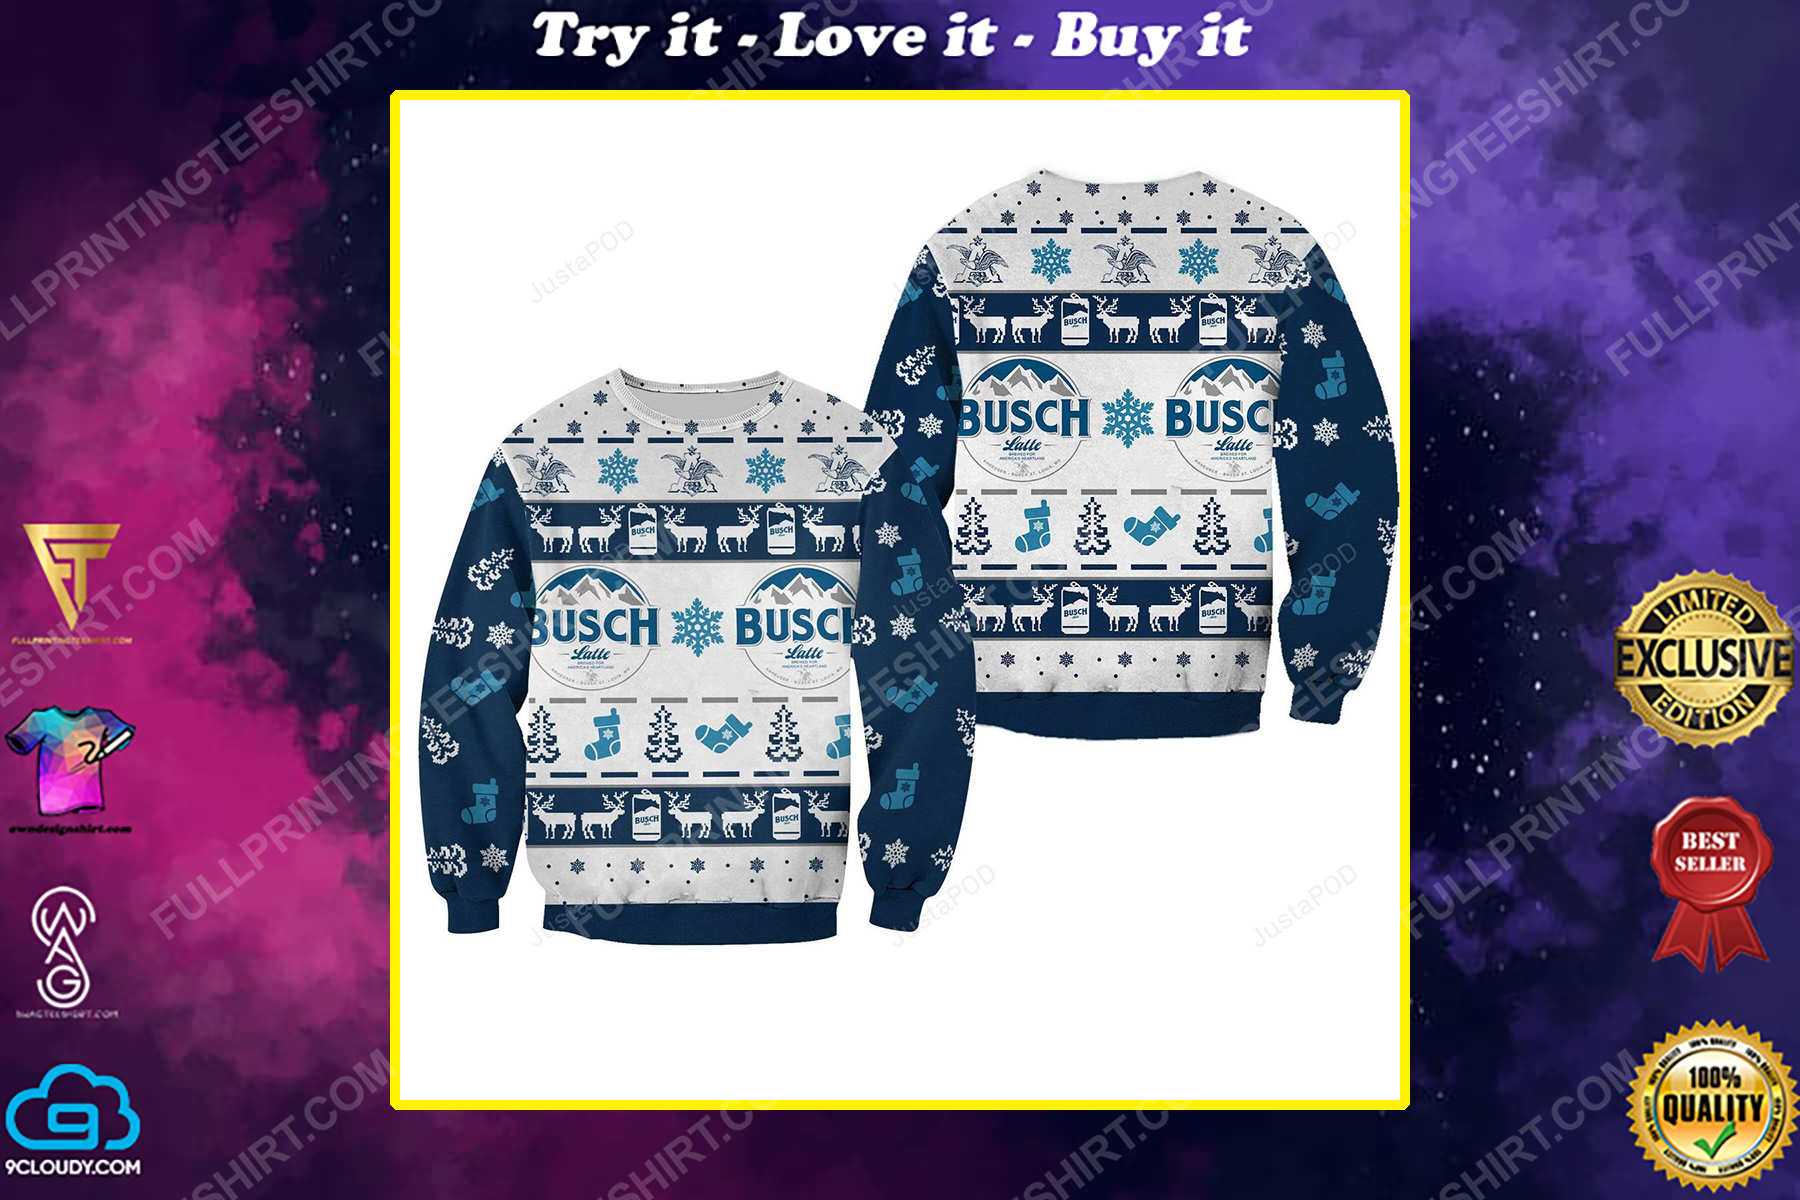 Busch latte christmas gift ugly christmas sweater